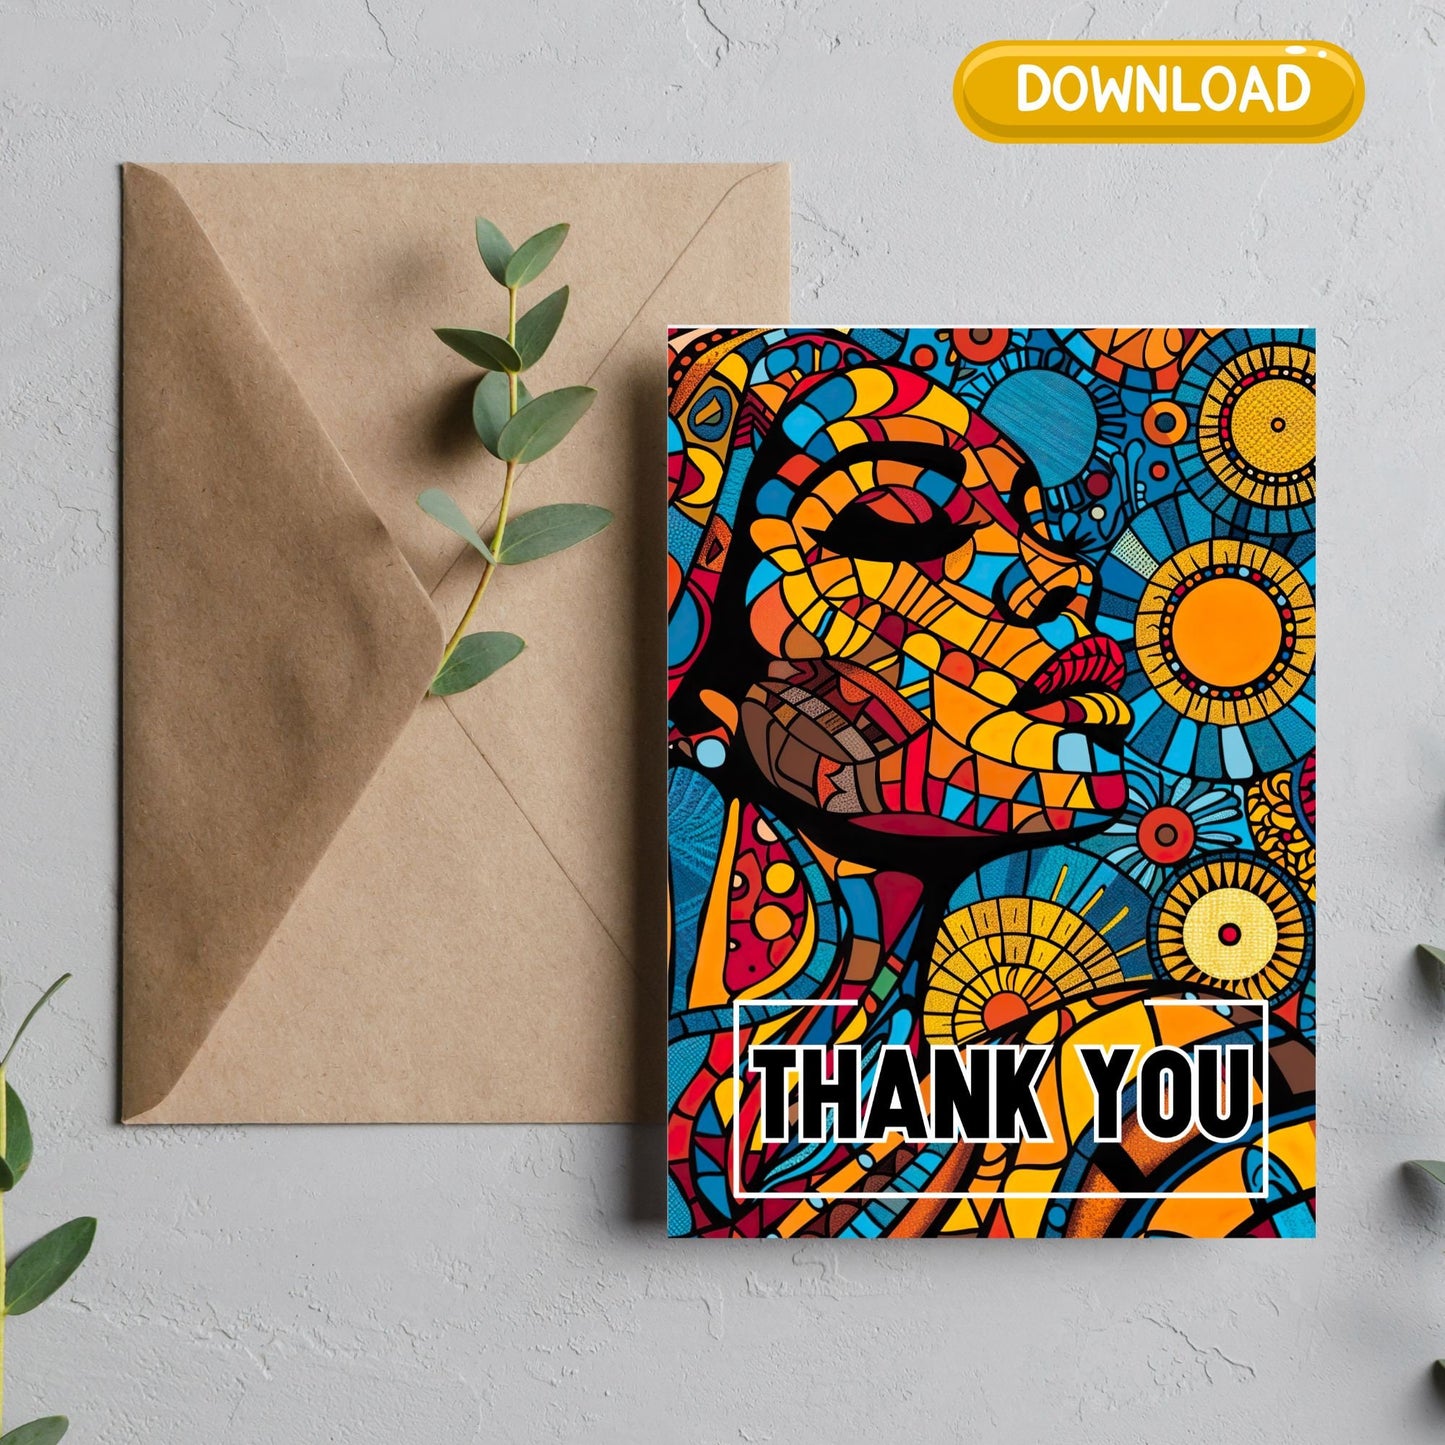 African Female Print Digital Download Thank You Card - Instant Printable Art -Ethnic Greeting Card Decor